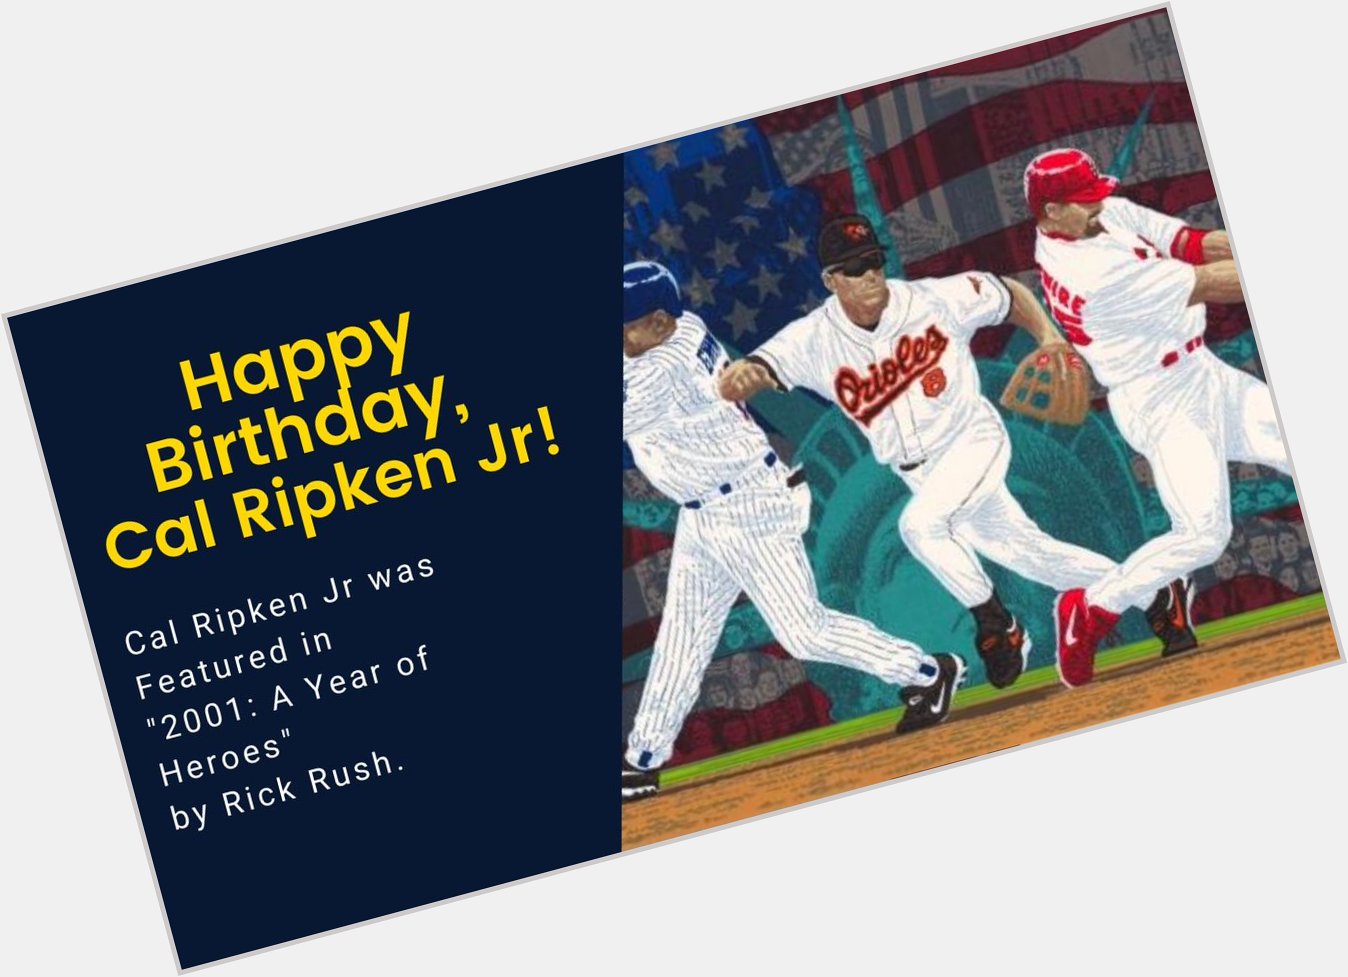 Happy Birthday, Cal Ripken Jr! Cal was featured in \"2001: A Year of Heroes\" by Rick Rush. 